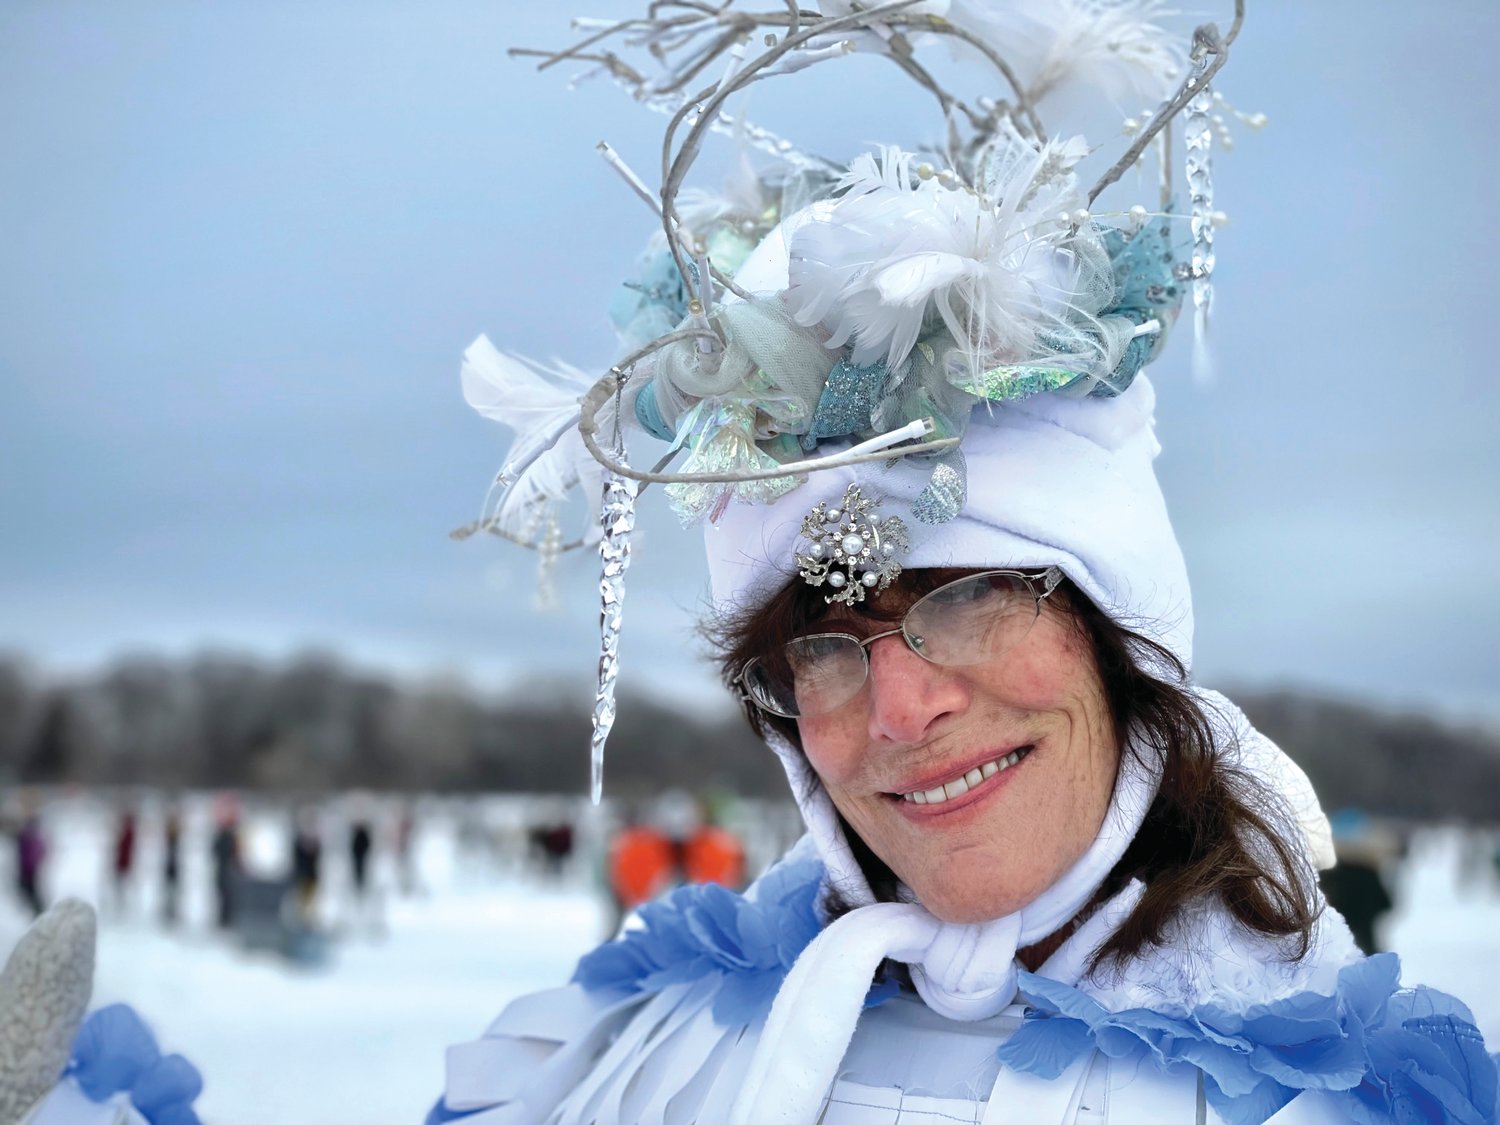 Artist Jill Waterhouse performs as the Goddess of the Glaciers during the Ice Shanty event on Sunday, Jan. 16, 2022. She wove her story with song, blessed seekers of wisdom with her ice wand, and granted wishes to the young at heart. (Photo by Susan Schaefer)